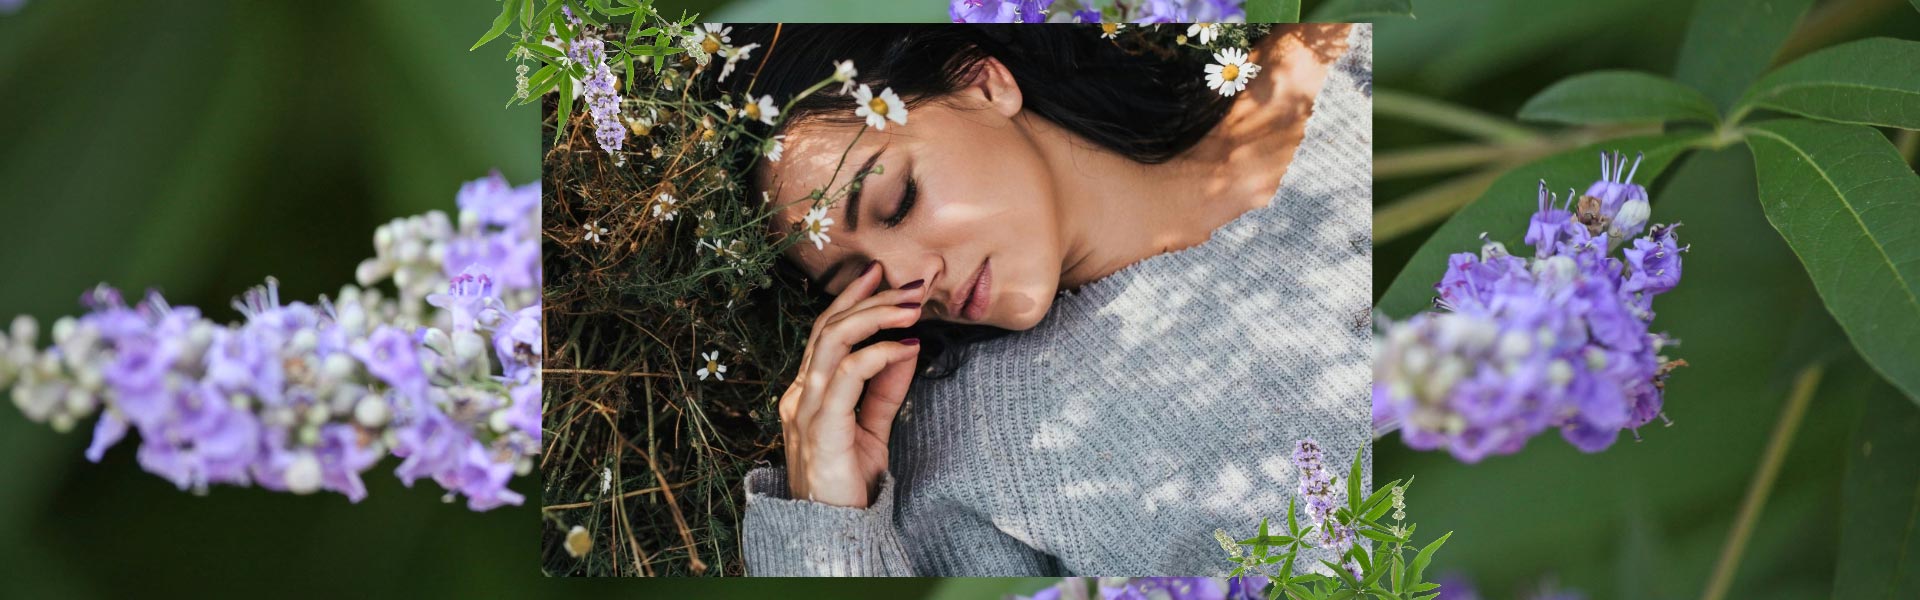 A woman with grey knitted sweater laying in a meadow with her eyes closed. The background image behind is of purple Chasteberry plant